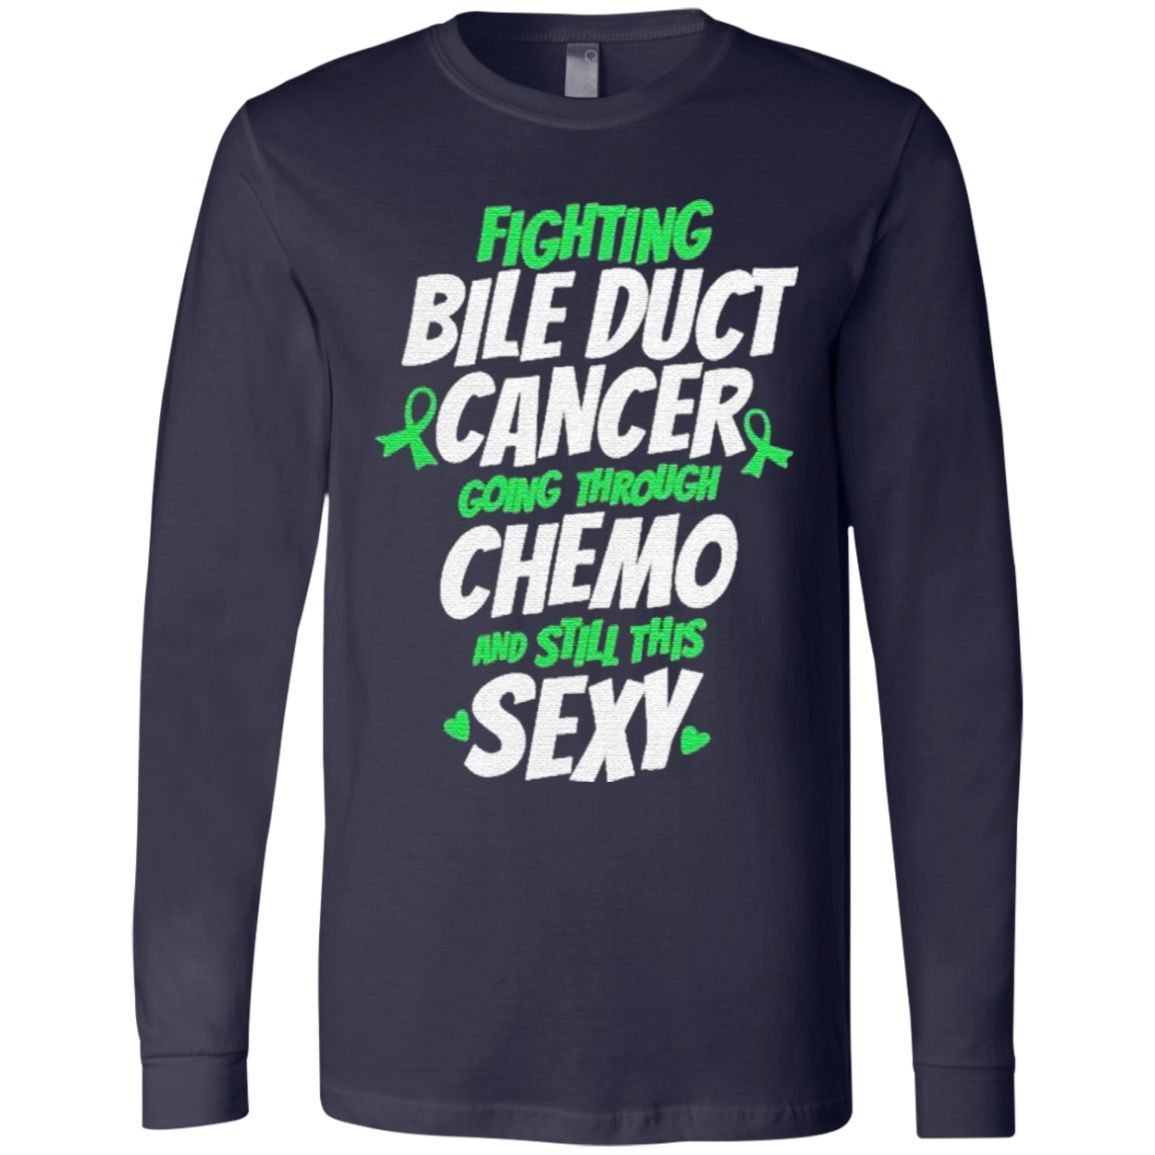 Bile Duct Cancer Chemo Treatment Patient Quote T-shirt